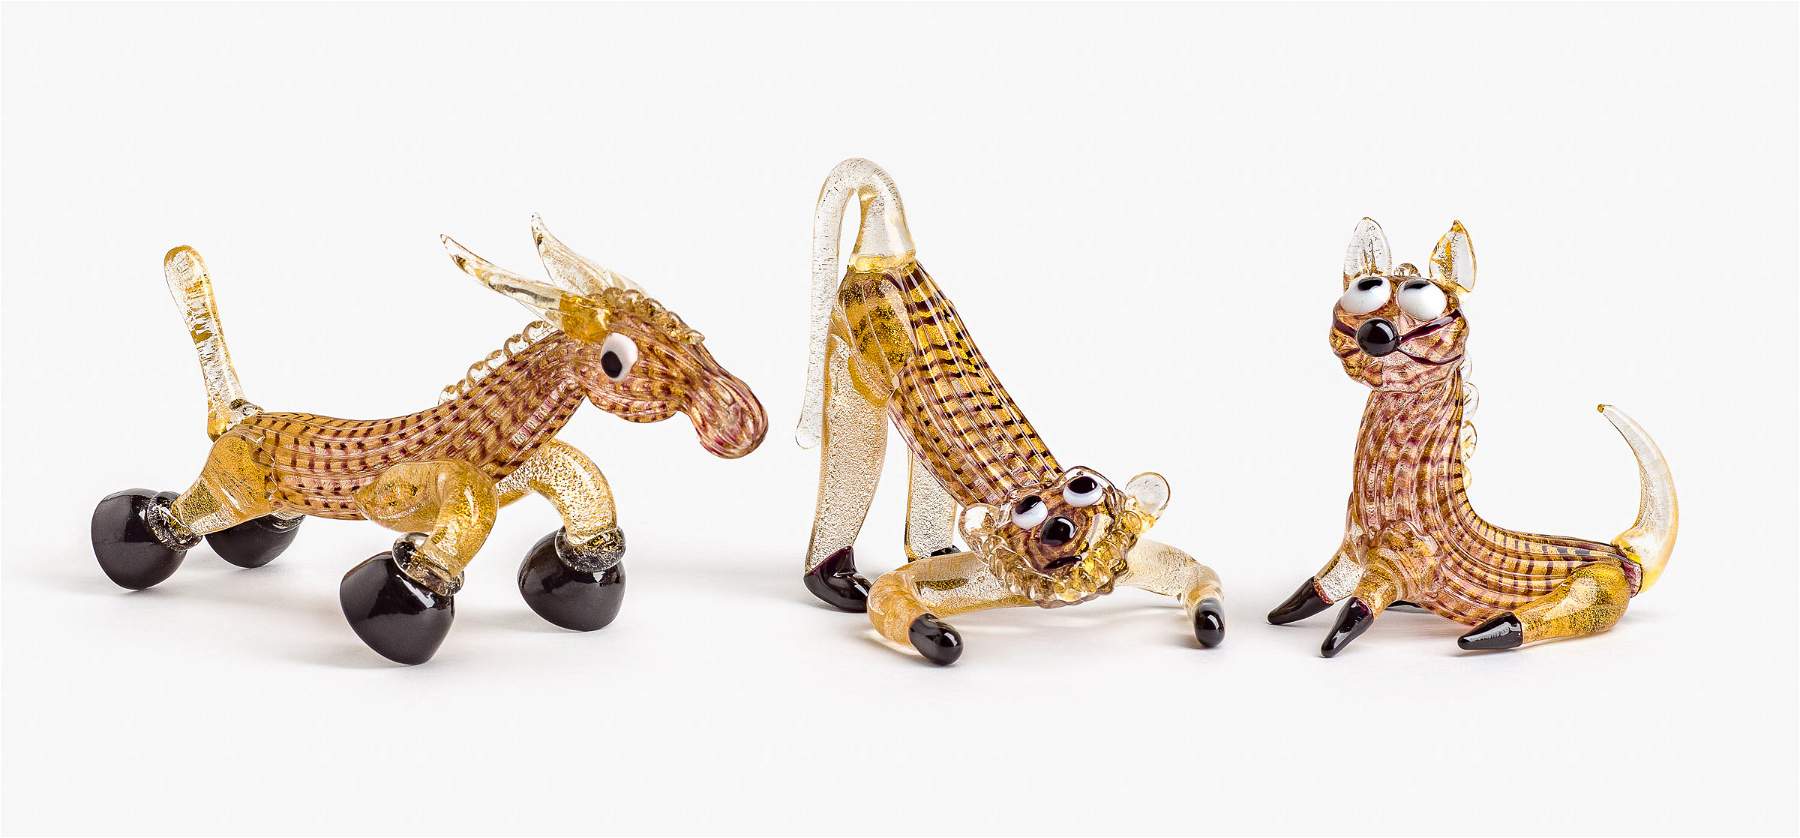 The history of Murano glass animals on display in Venice, with an important collection